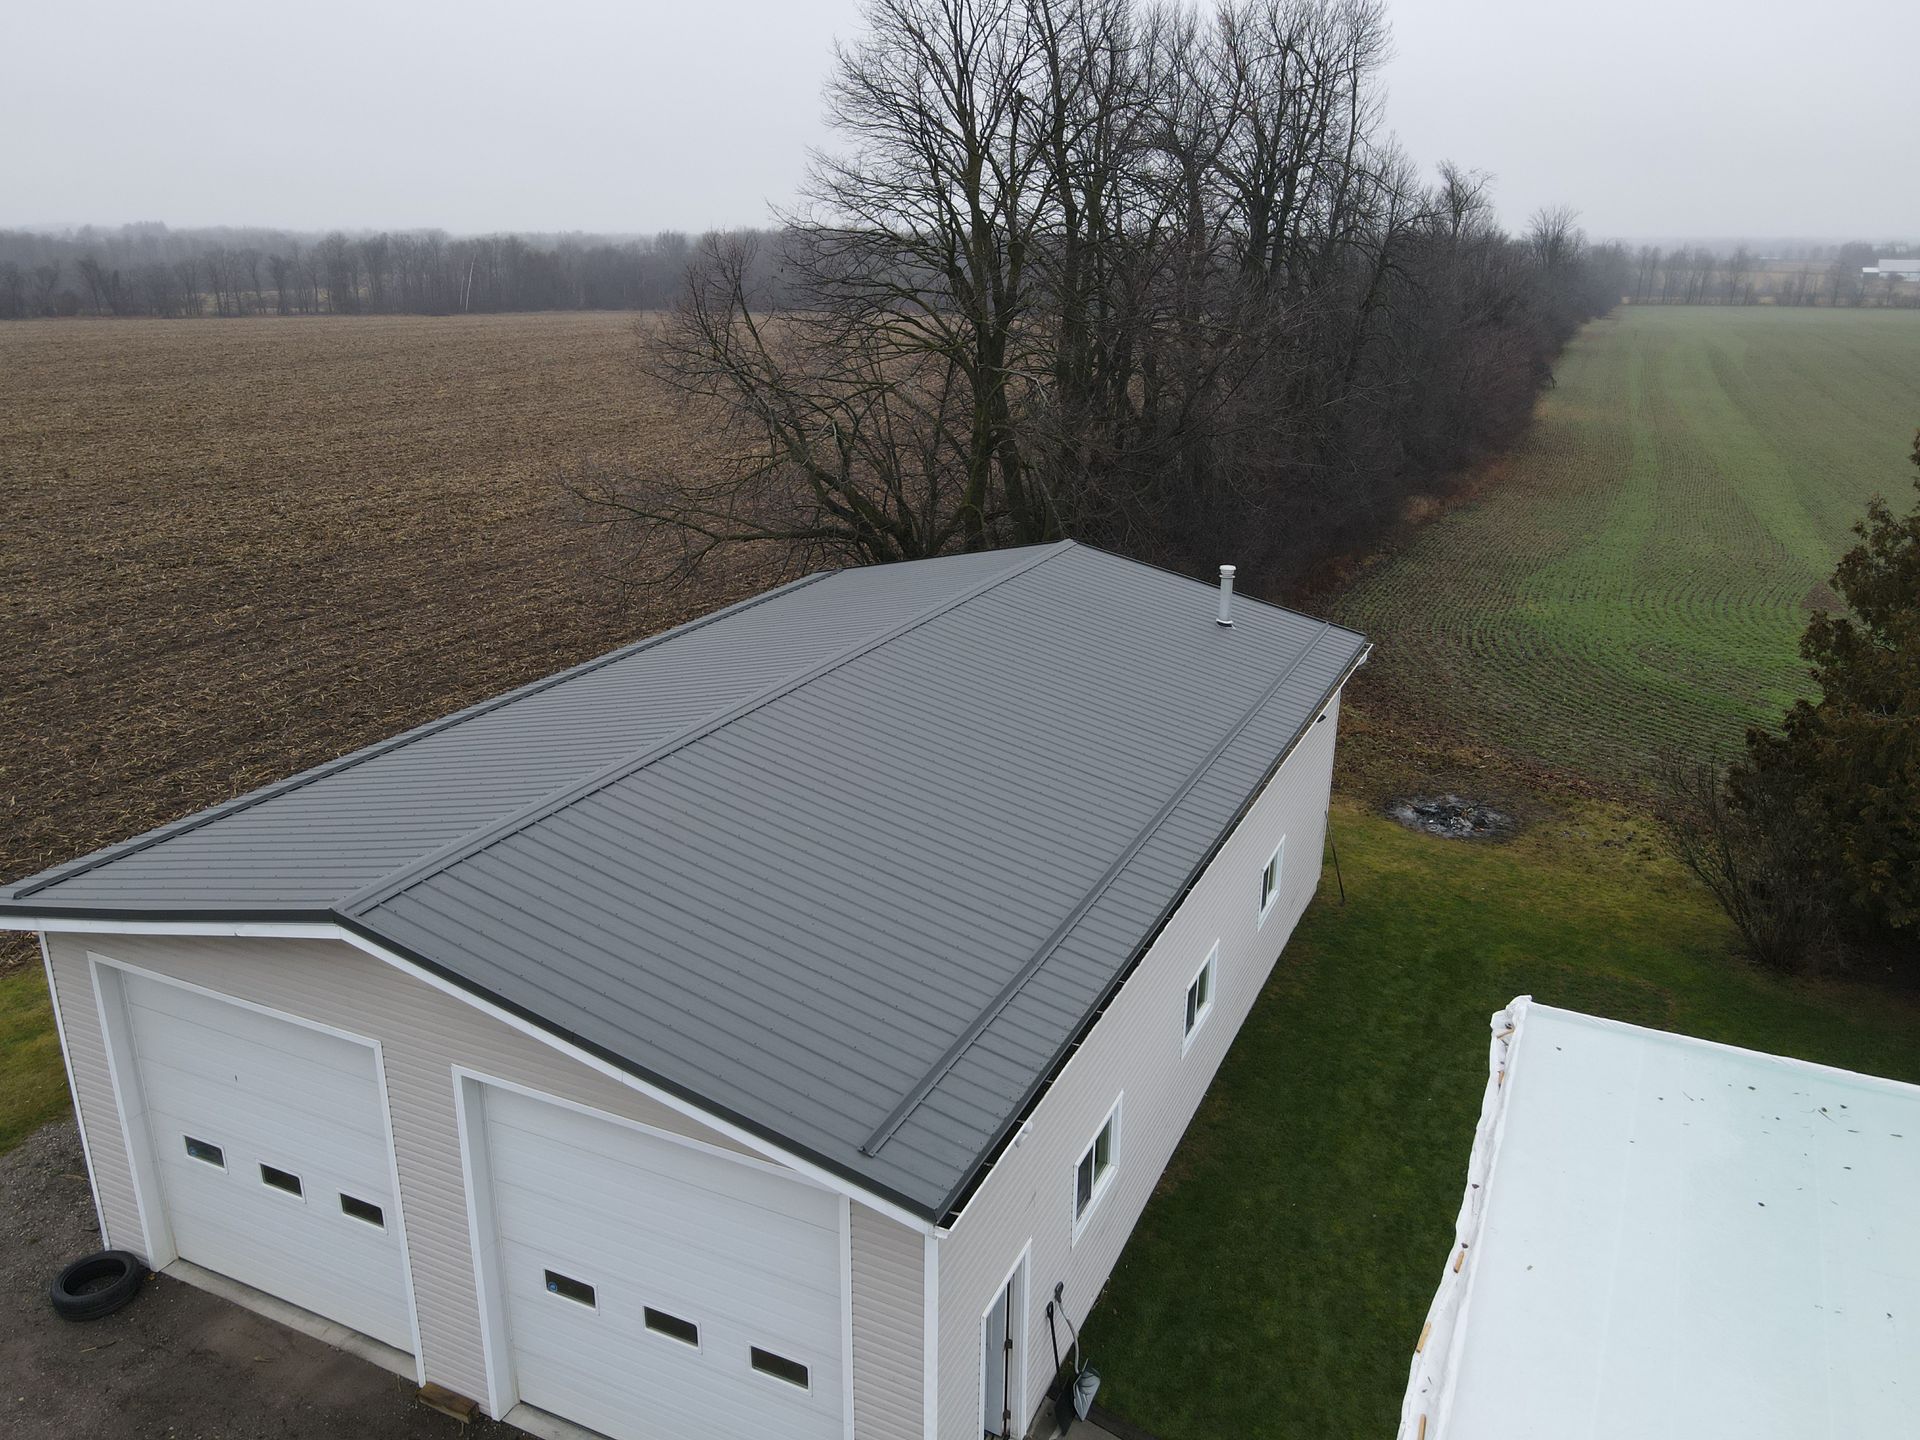 An aerial view of a garage with a gray roof.